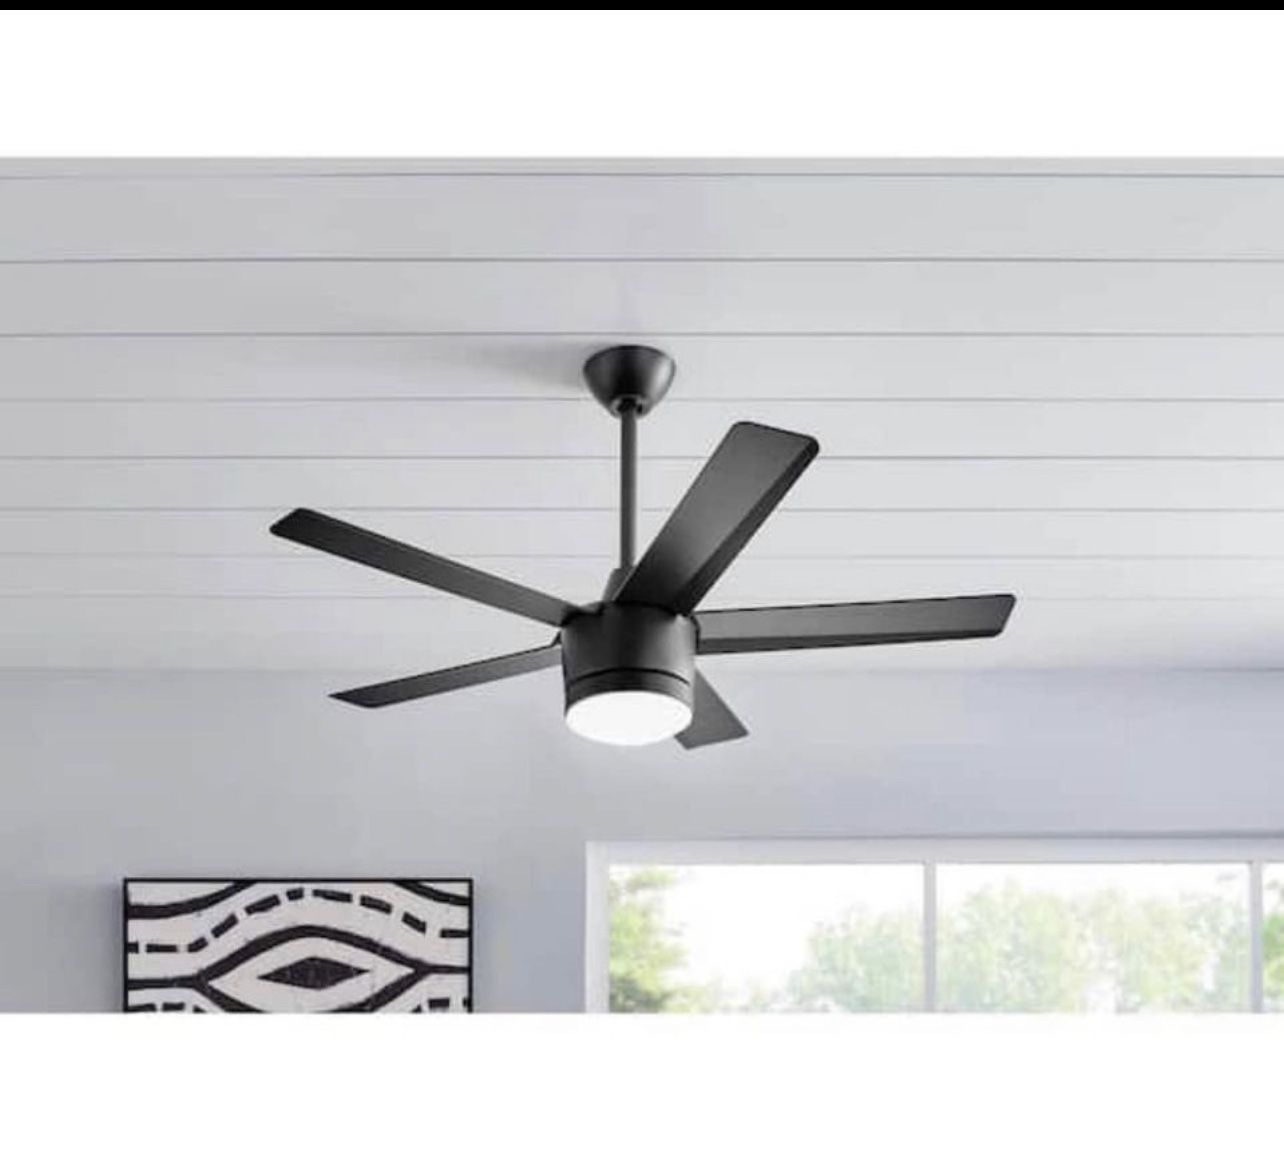 Home Decorators Collection Merwry 48 in. Integrated LED Indoor Matte Black Ceiling Fan with Light Kit